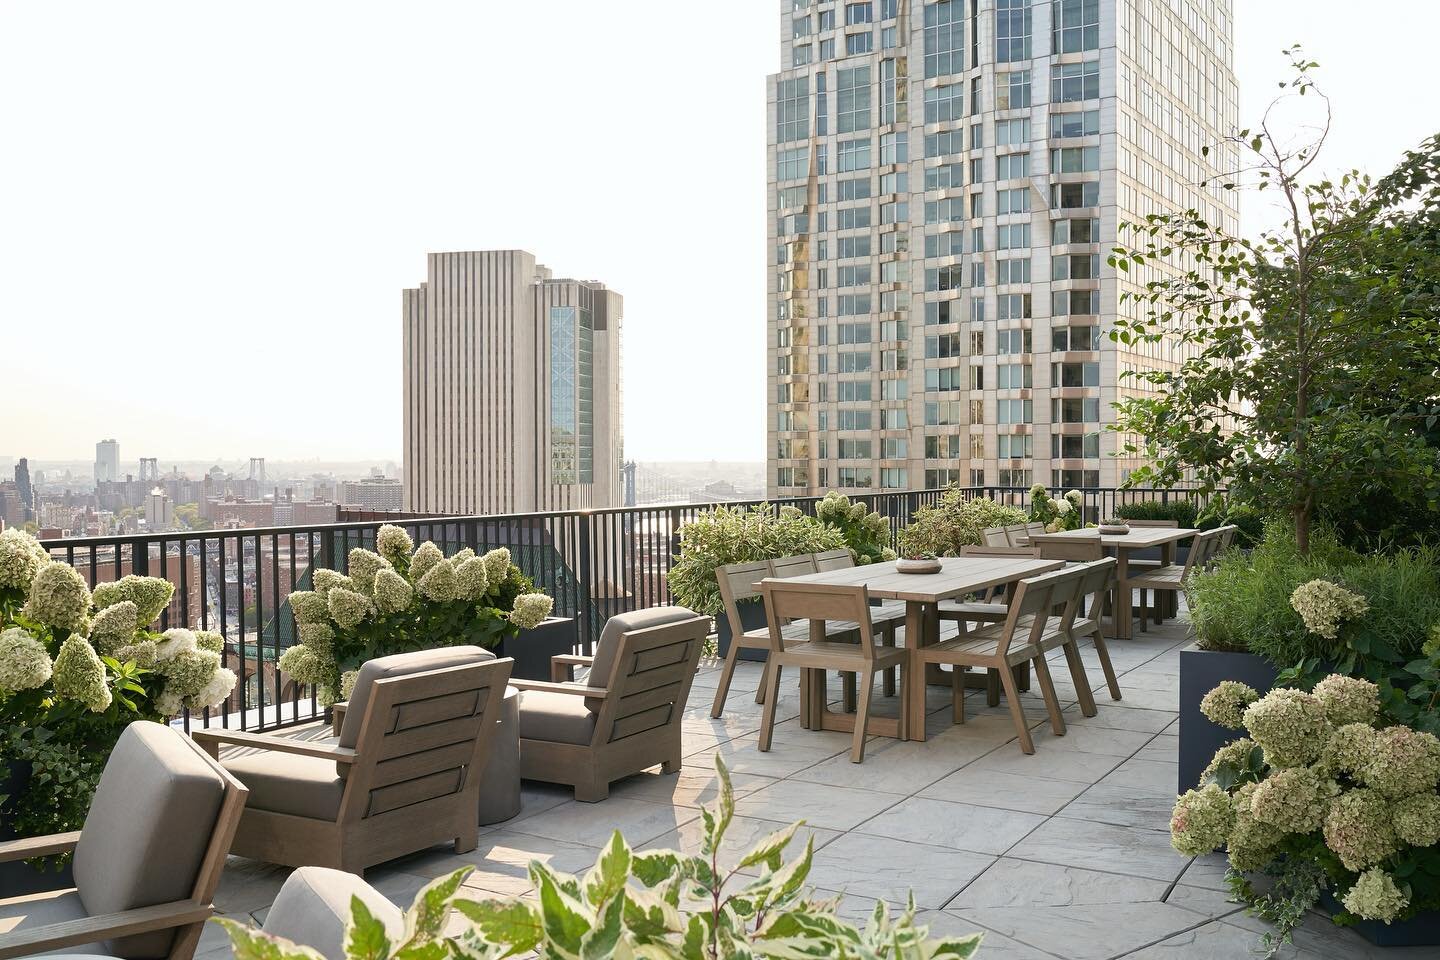 We are very excited to share images of the rooftop garden we installed this past spring at @no33parkrow .
We greened out this outdoor ammenity space for the very talented interior design studio @thecappiello 
This is one of the newest residential dev